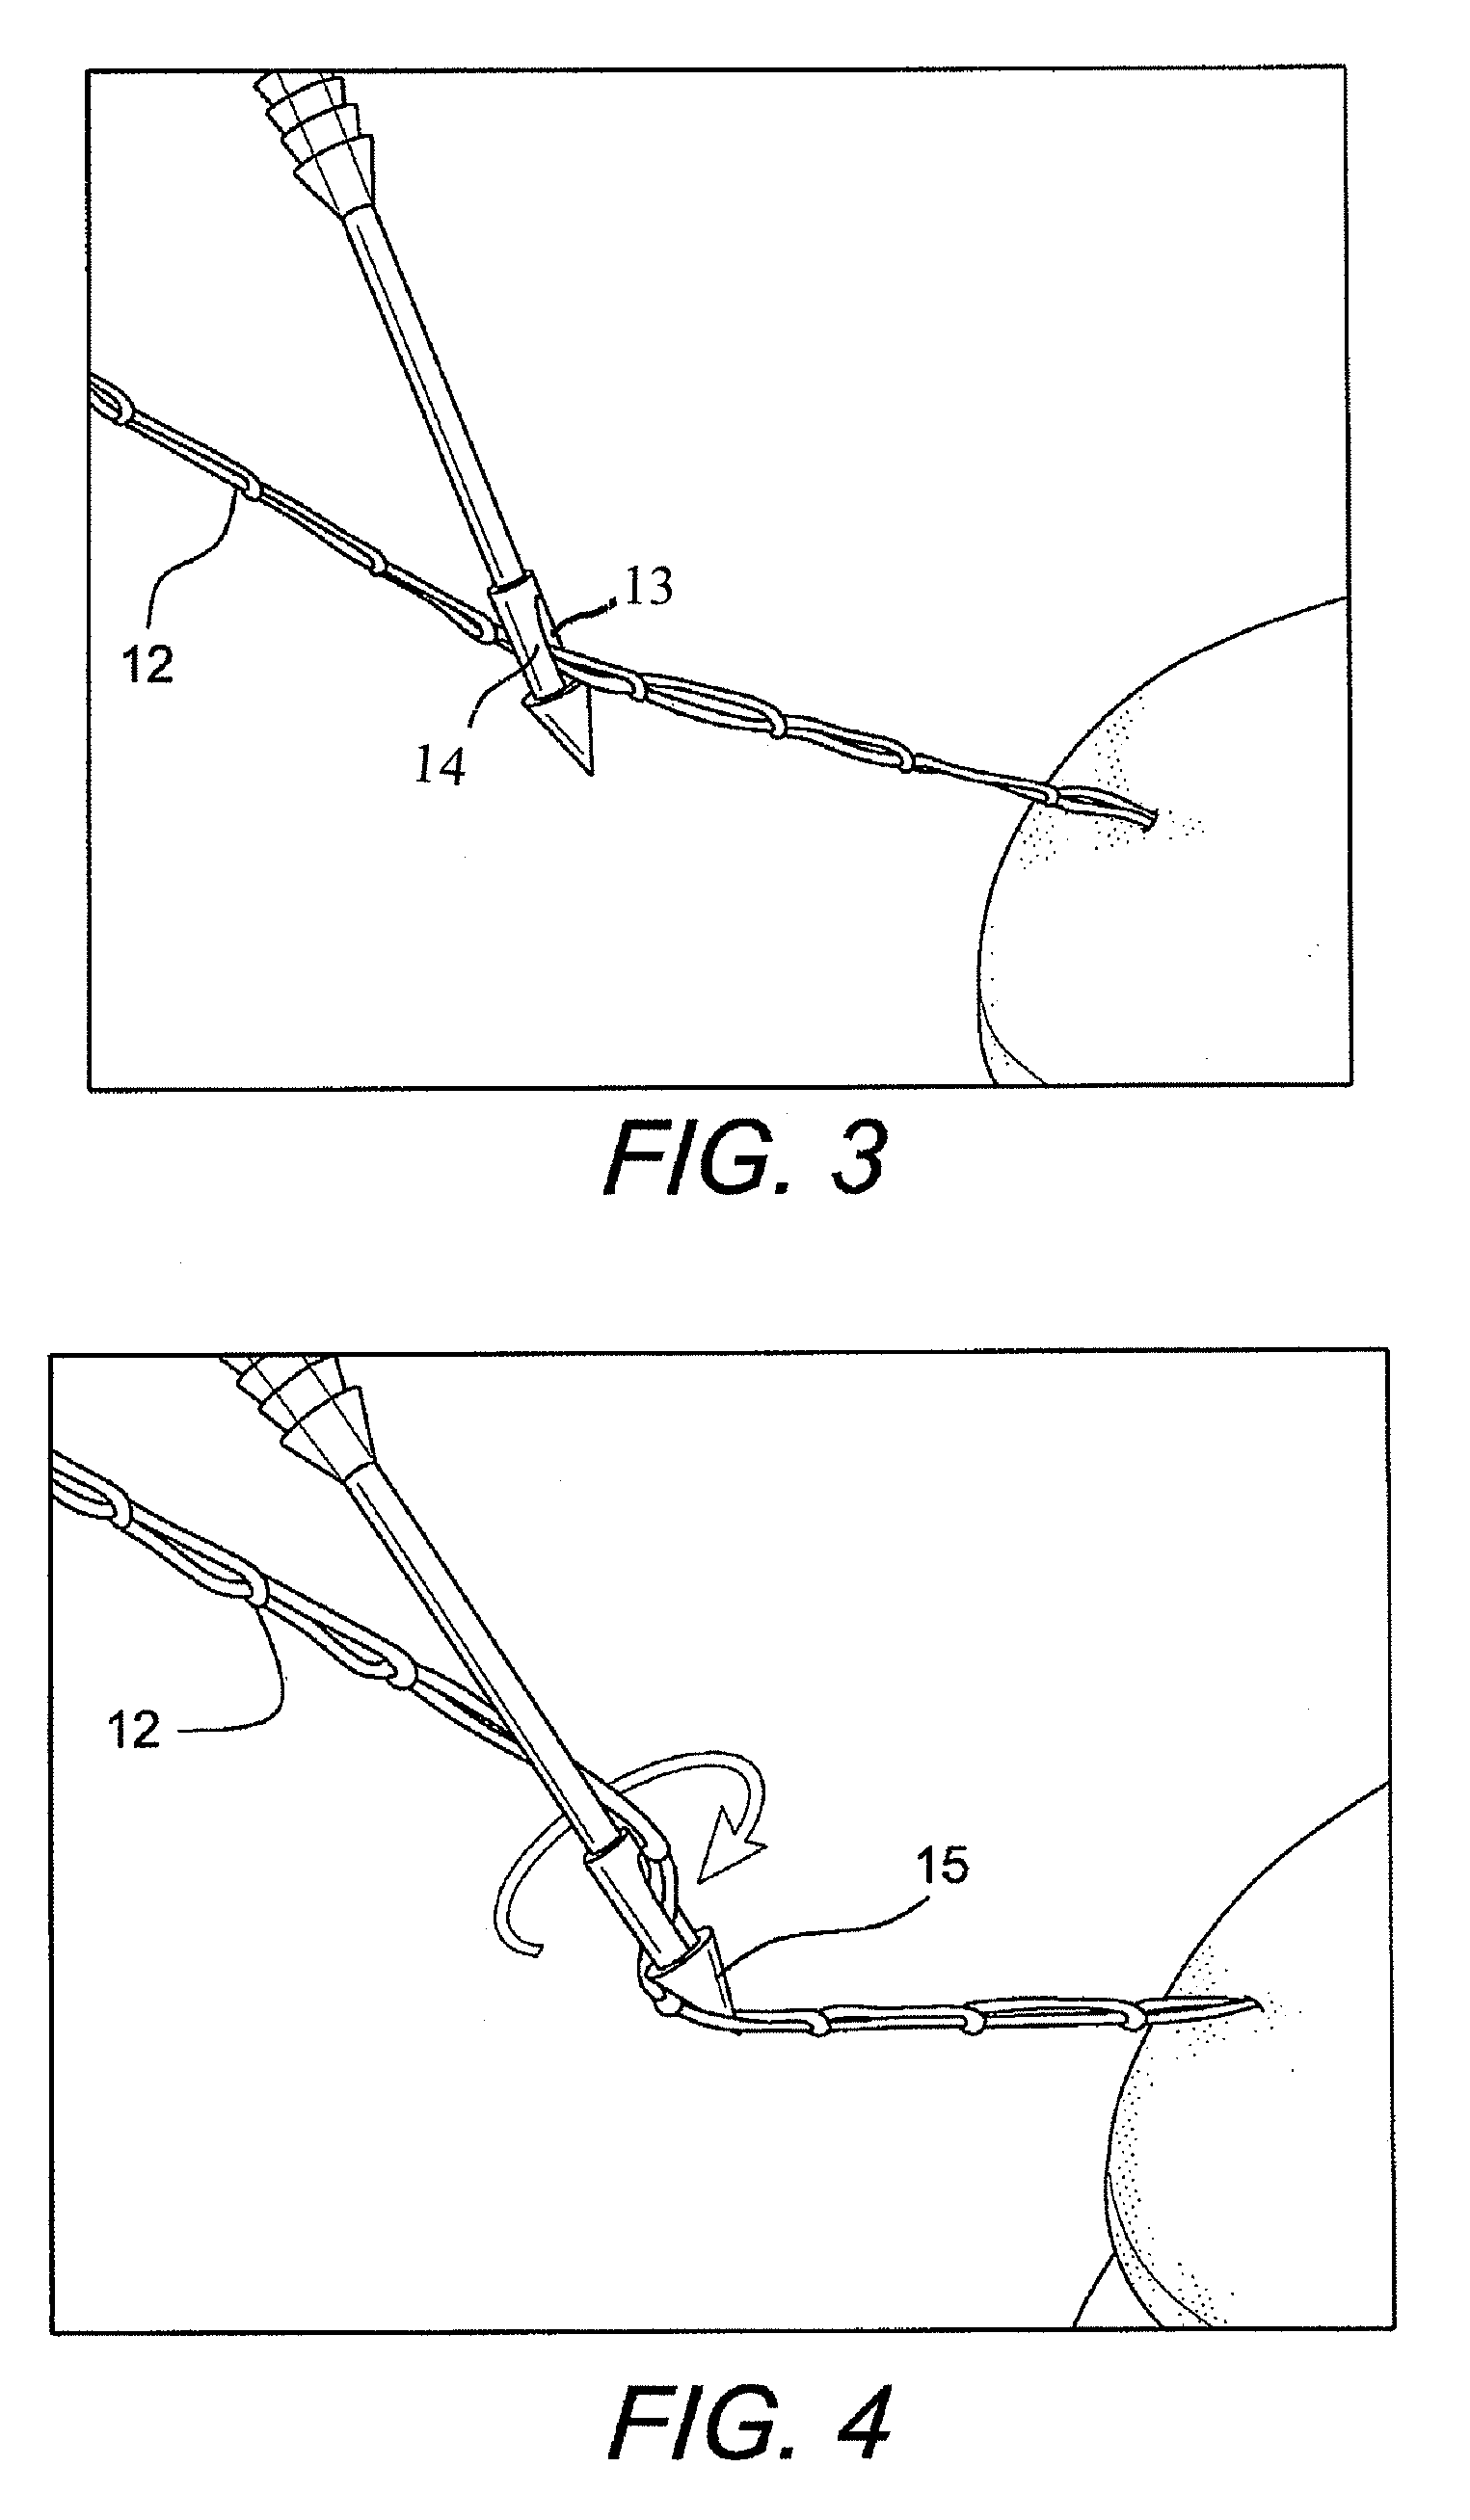 Technique for tissue fixation by capturing and anchoring a link of suture chain attached to tissue